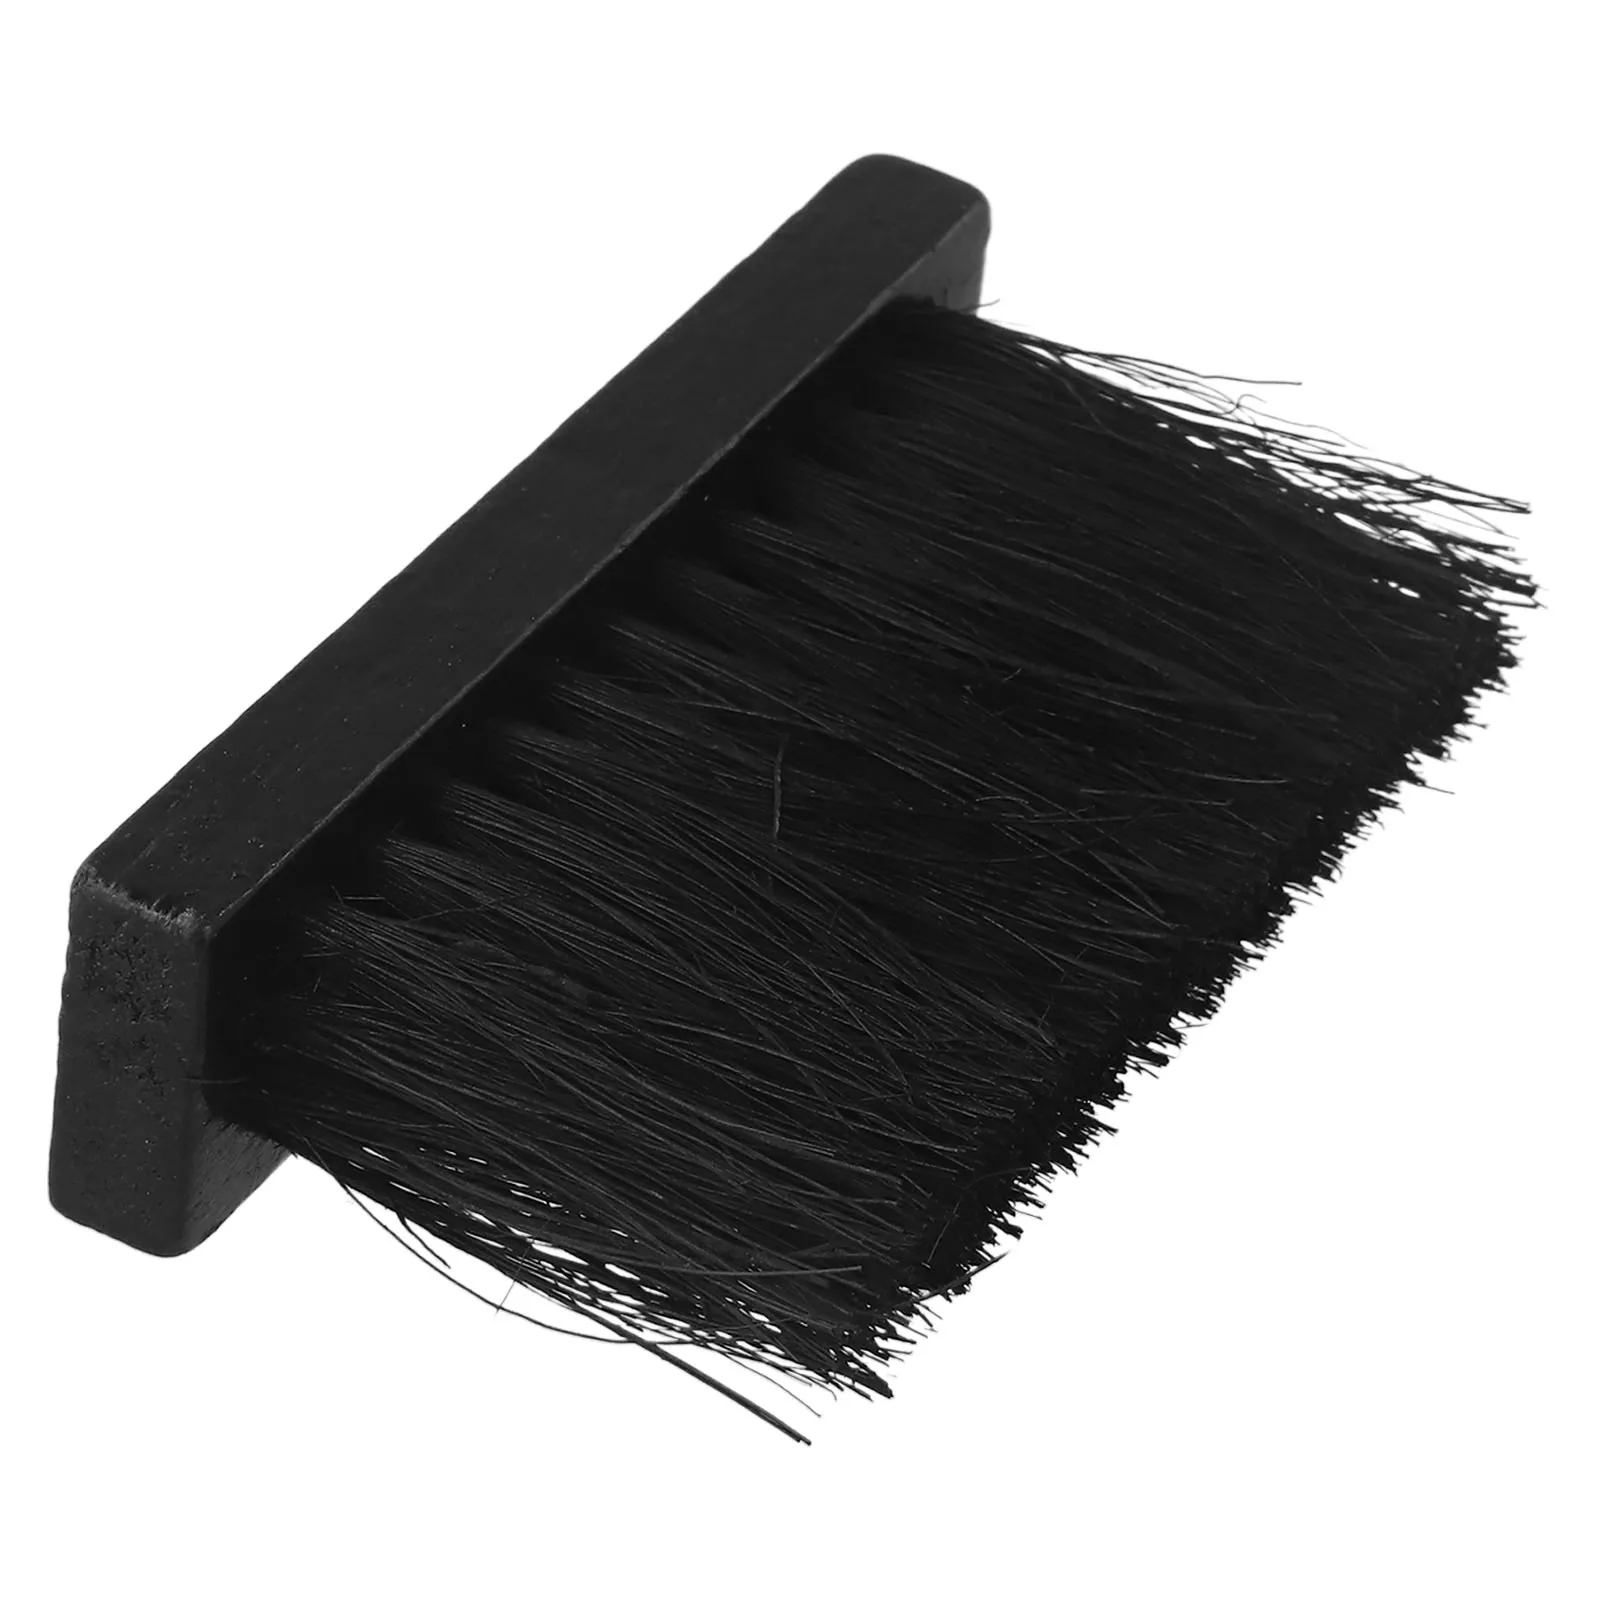 

High Quality Brand New Fireplace Brush Cleaning Brushes 13.5x3.5x1.3cm 1Pcs Brush Head Fireplace Fireside Refill Cleaning Square